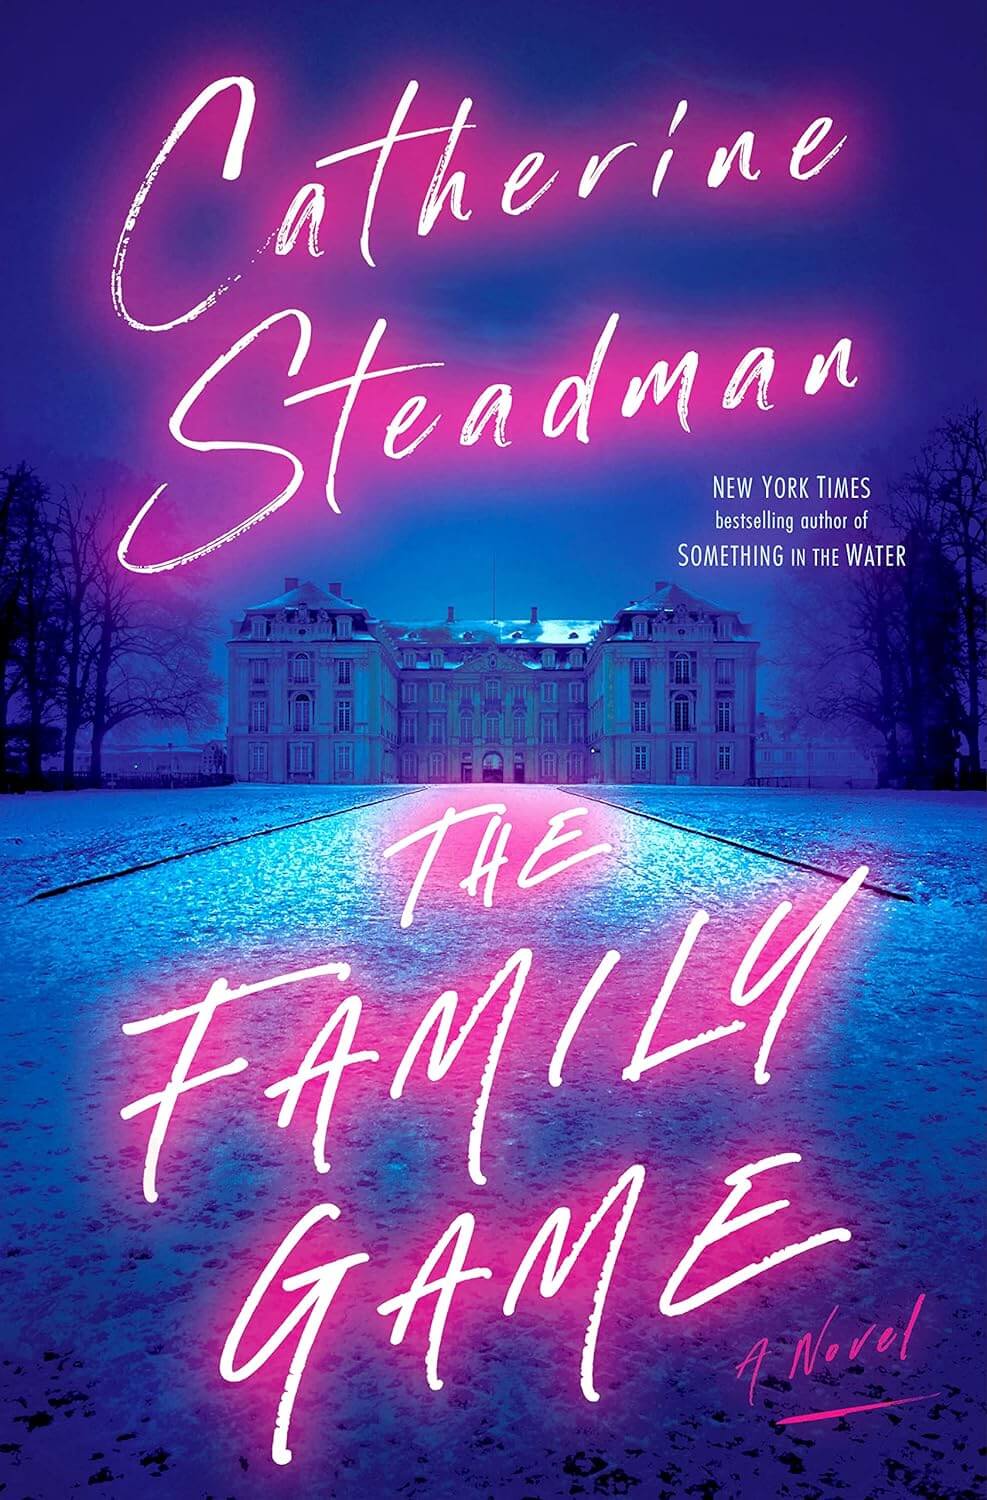 the-family-game-by-catherine-steadman-book-summary